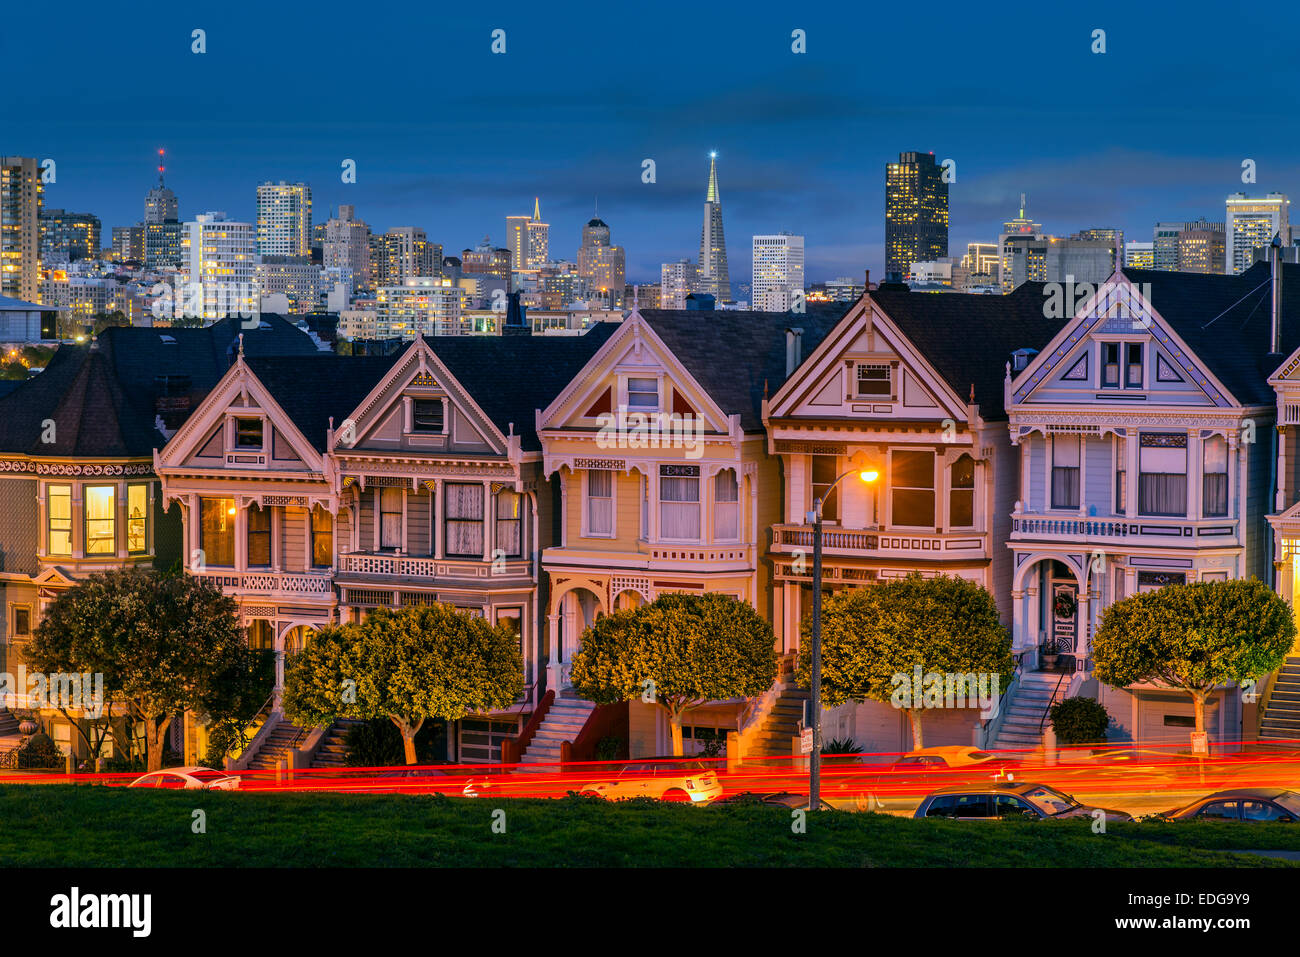 Night view of the Painted Ladies victorian houses in Alamo Square, San Francisco, California, USA Stock Photo